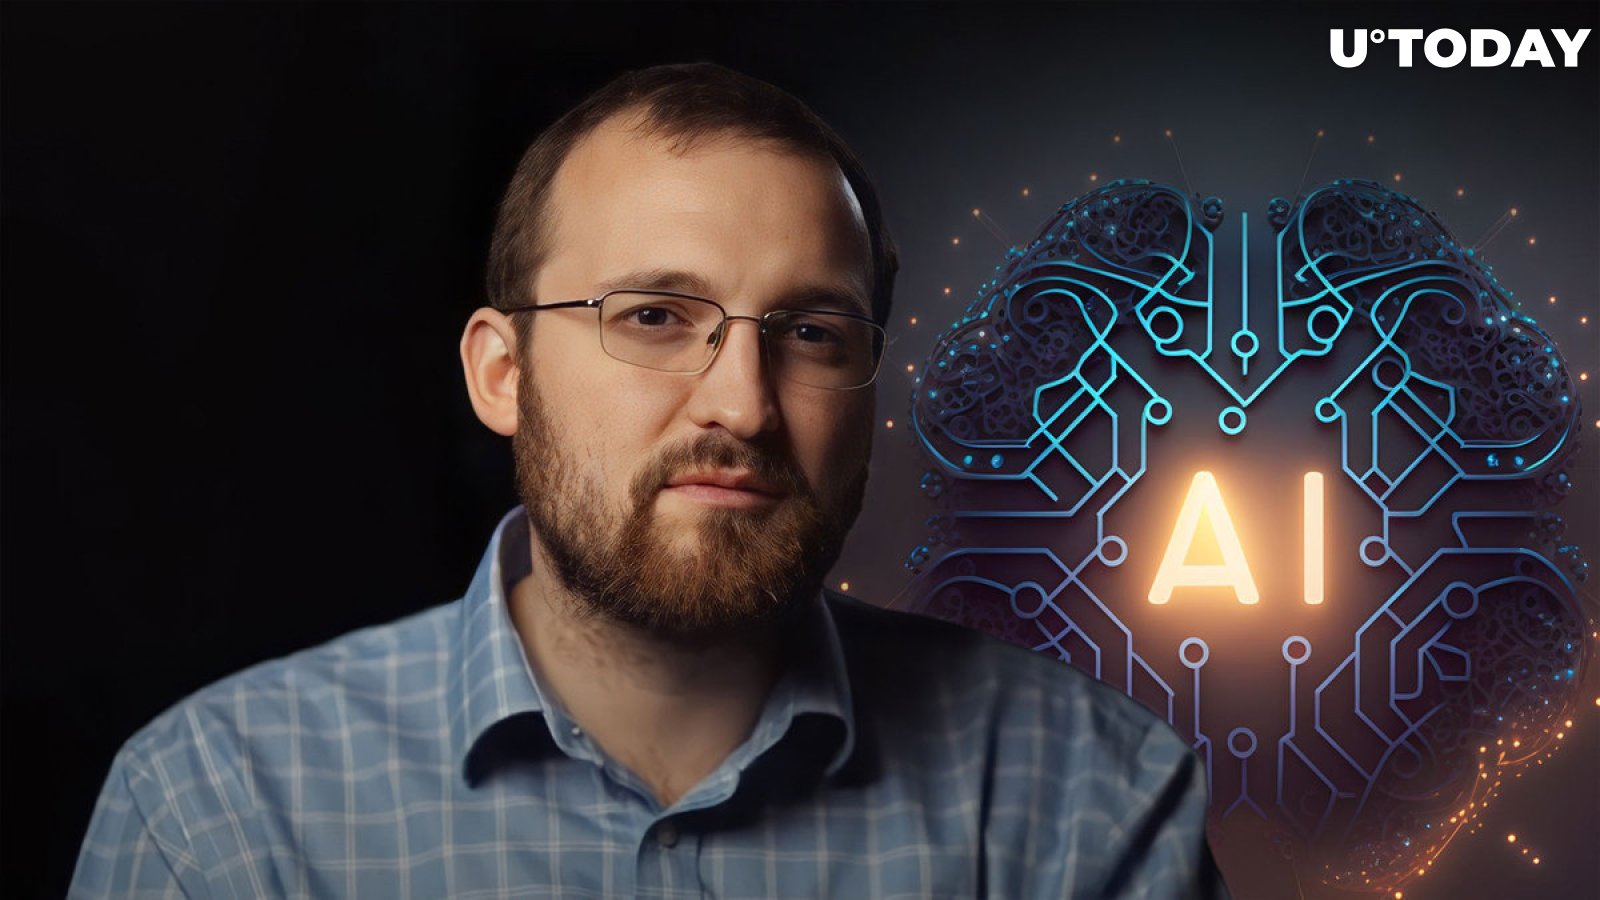 Cardano Founder Makes Curious Statement About Crypto AI